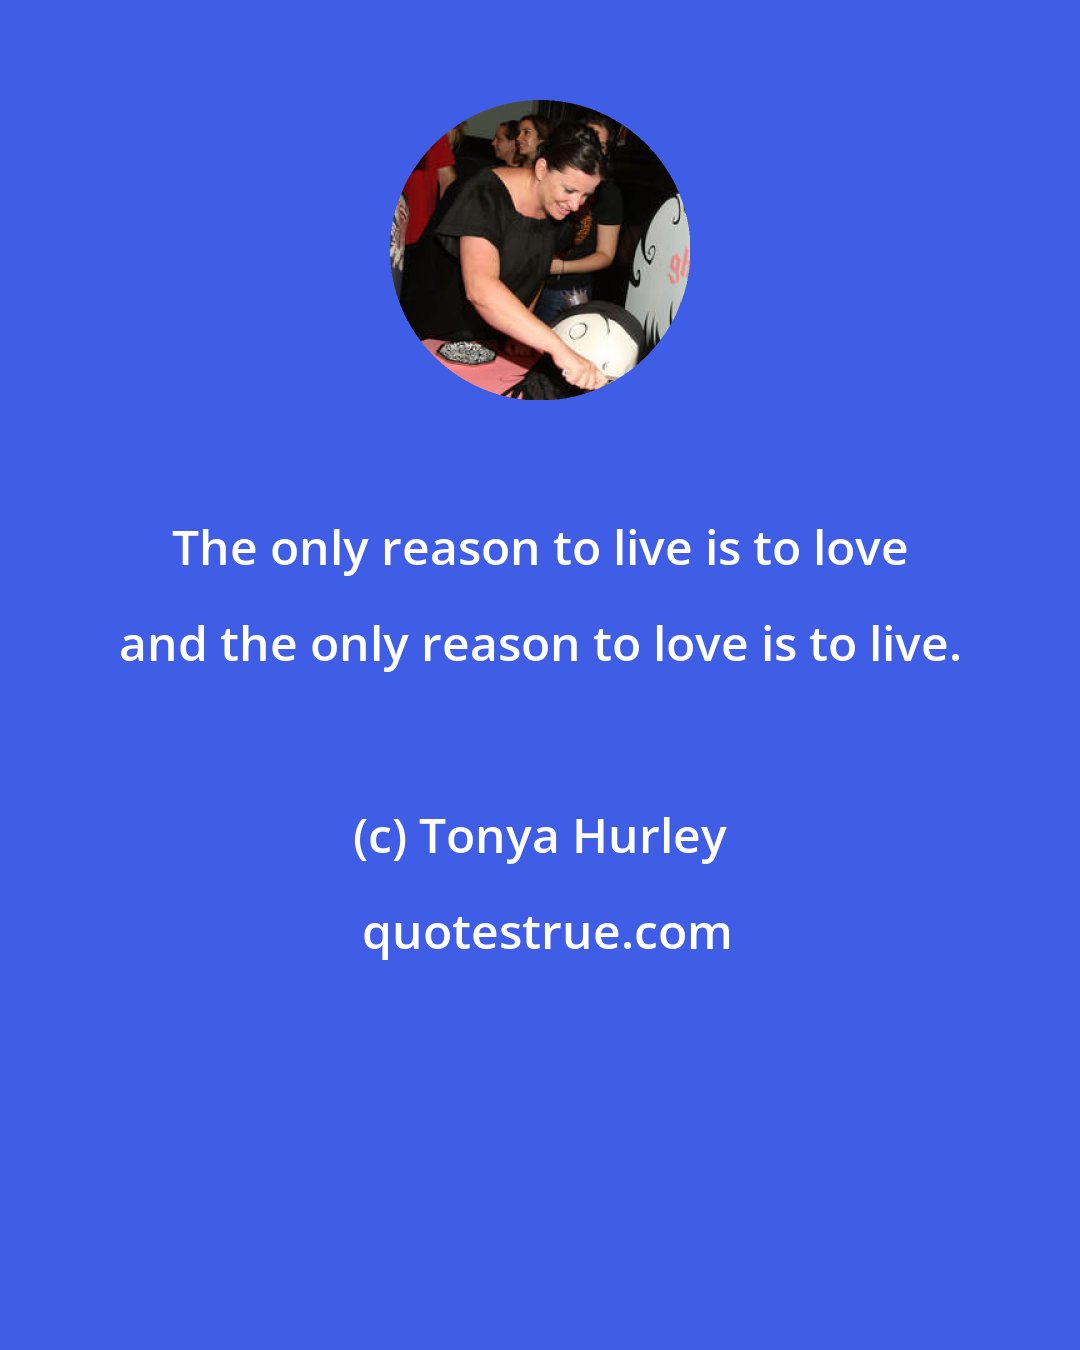 Tonya Hurley: The only reason to live is to love and the only reason to love is to live.